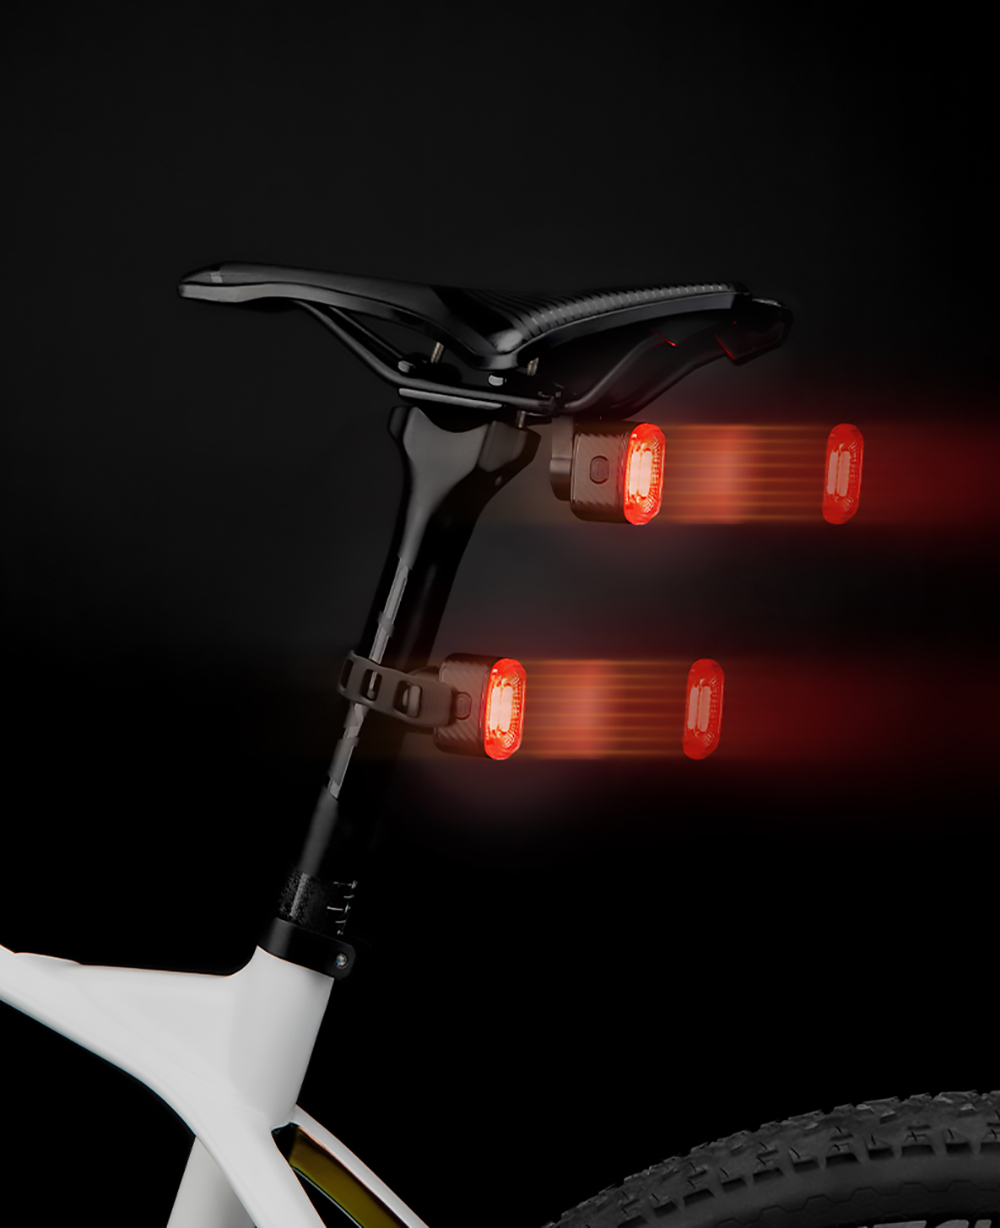 ROCKBROS Q2 Bike Taillight Bicycle Brake Light IPX6 Waterproof Rechargeable Rear Light